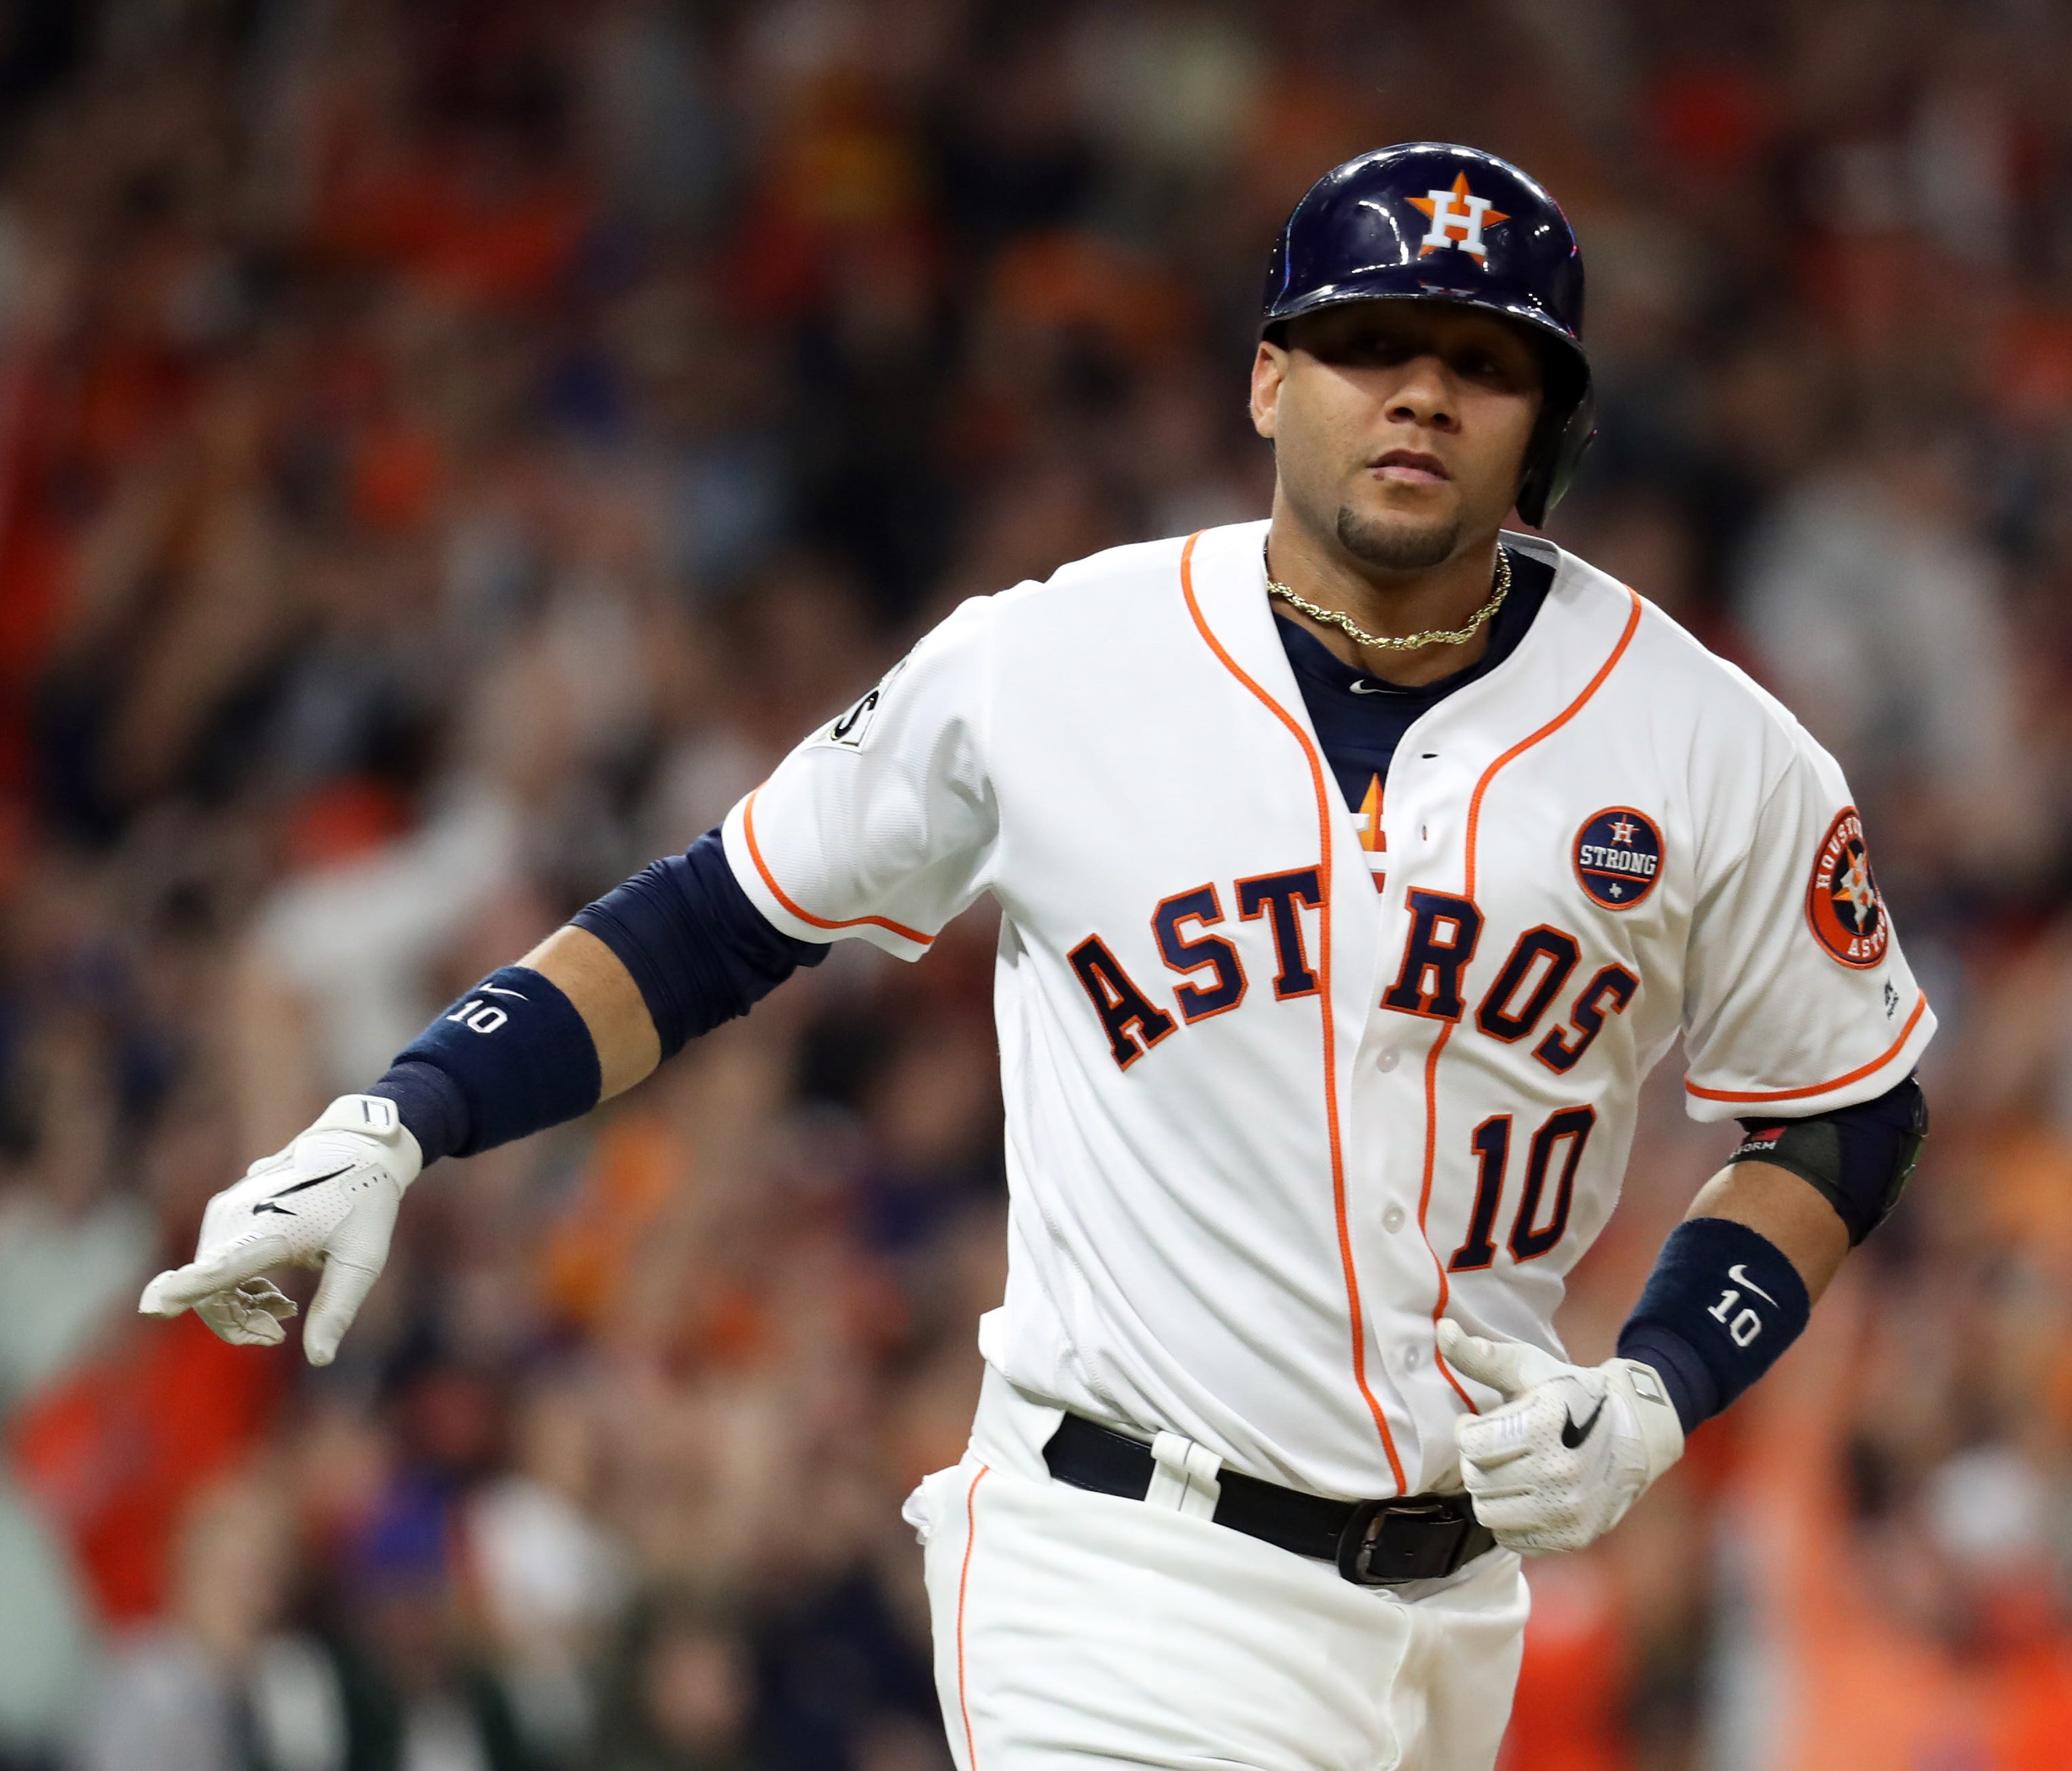 Astros' Yuli Gurriel celebrates after hitting a solo home run off Yu Darvish in the second inning.